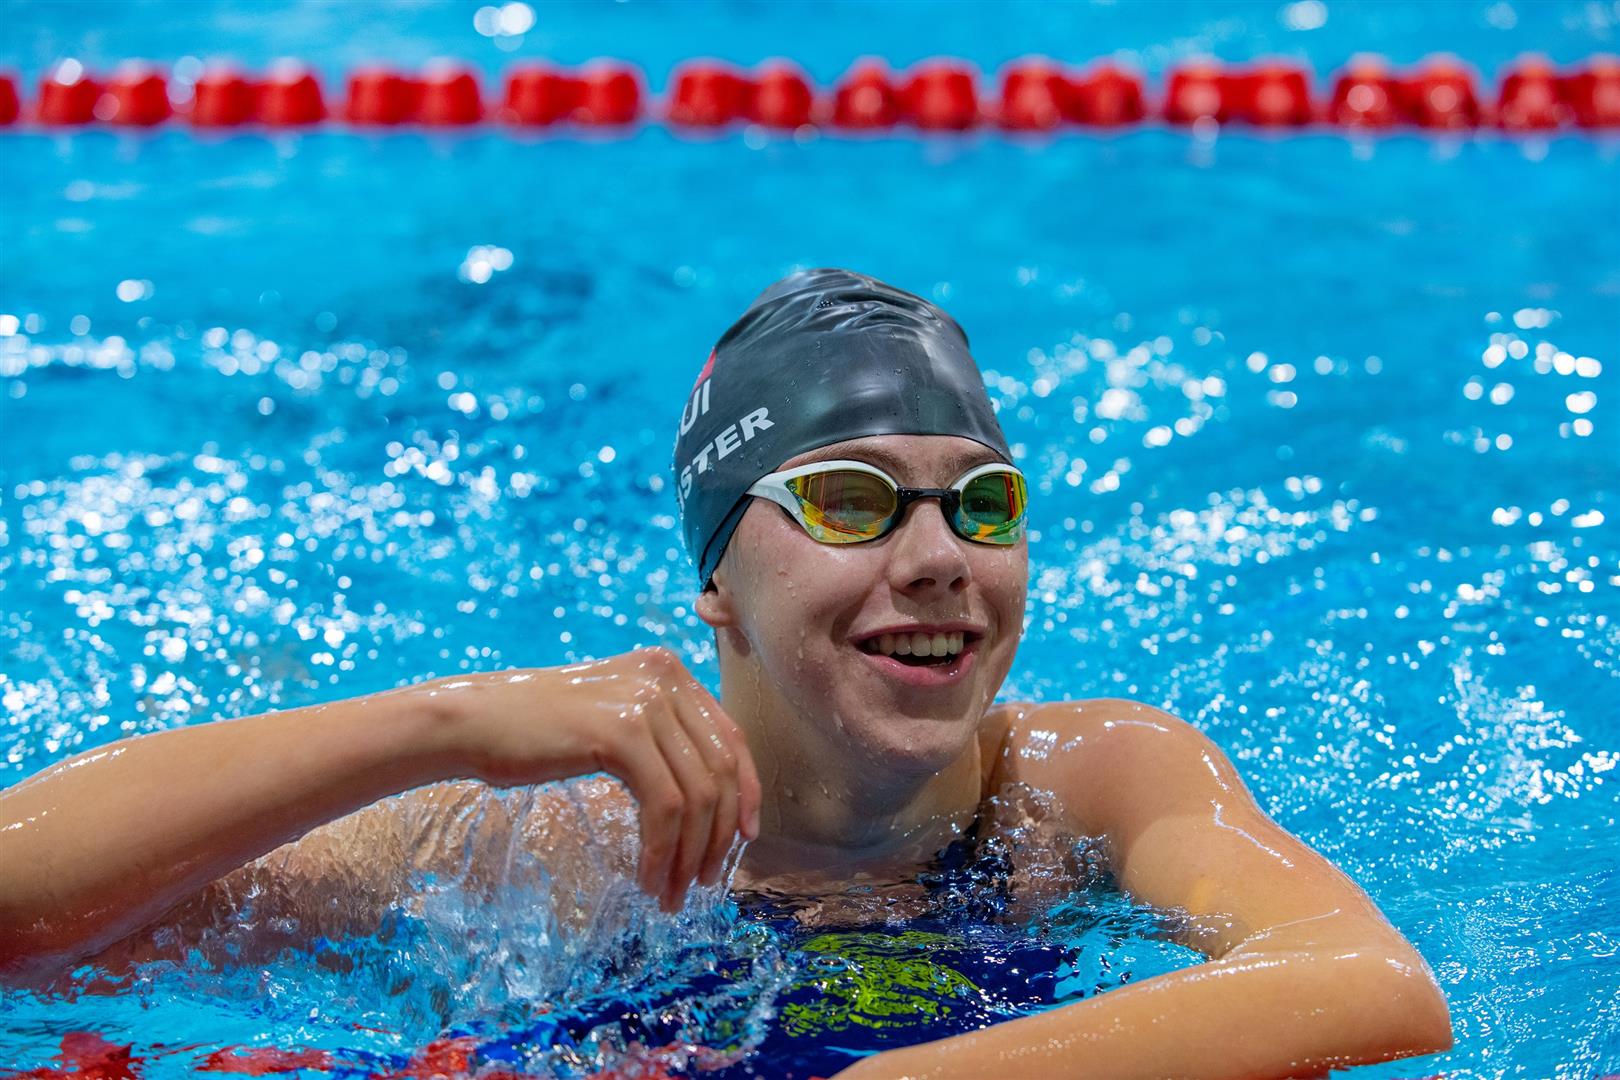 Nora Meister at the European Swimming Championships in Funchal in 2021.